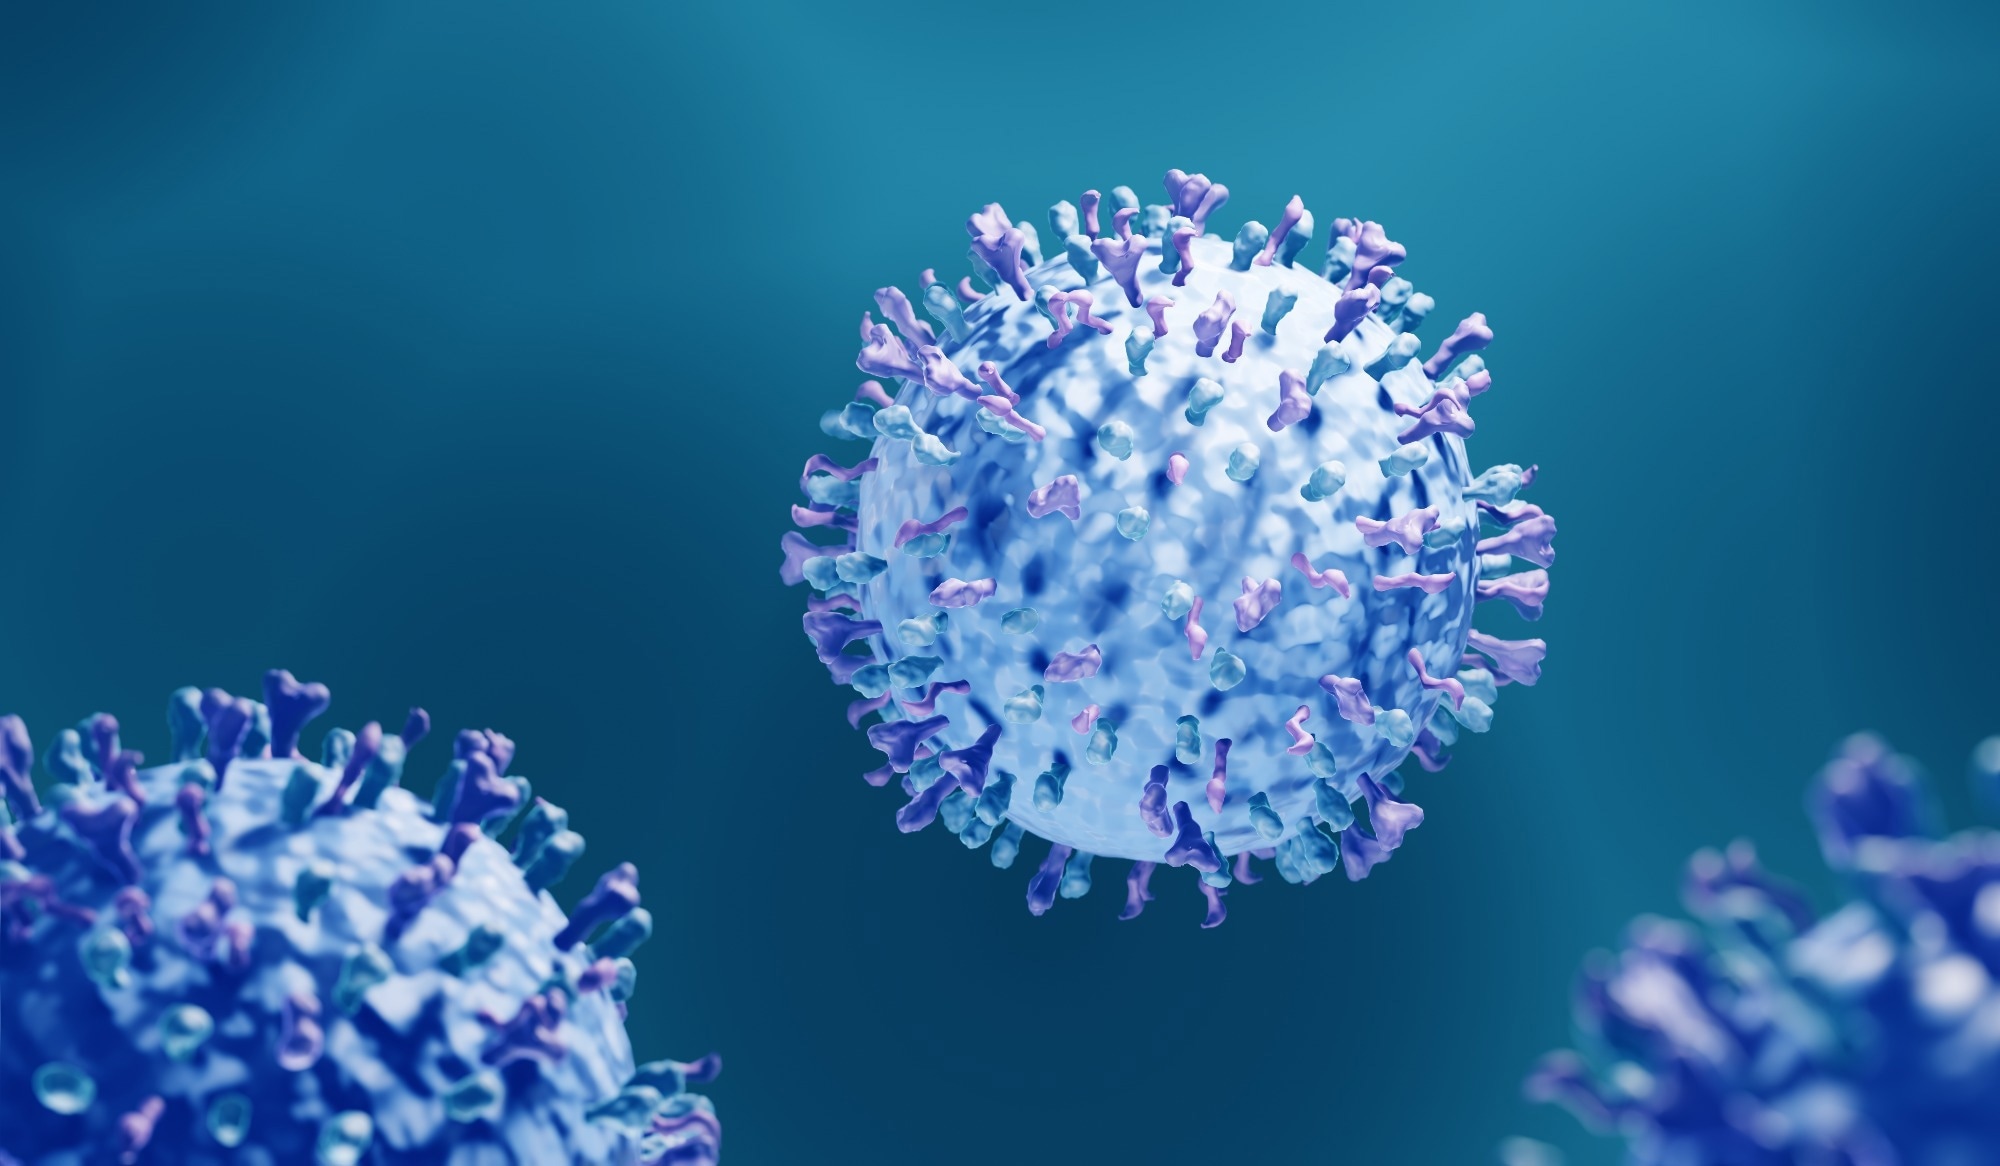 Study: Risk factors for severe respiratory syncytial virus infection during the first year of life: development and validation of a clinical prediction model. Image Credit: ART-ur/Shutterstock